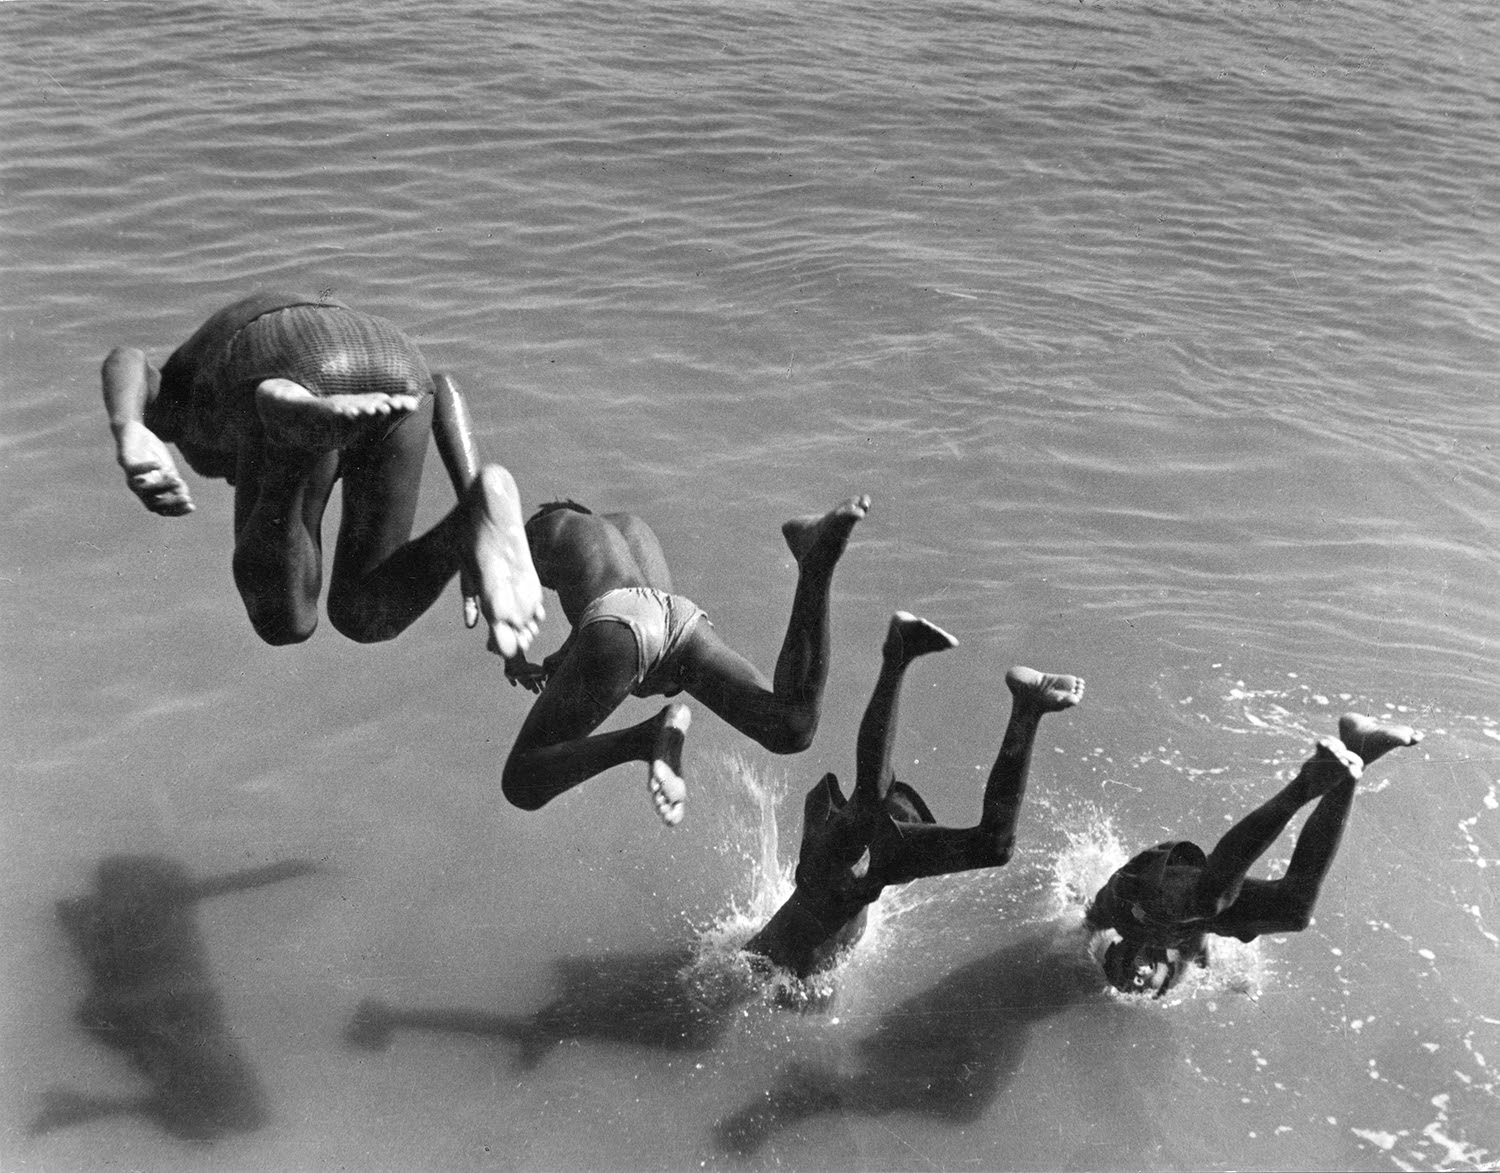 Four boys diving in the water in an order.